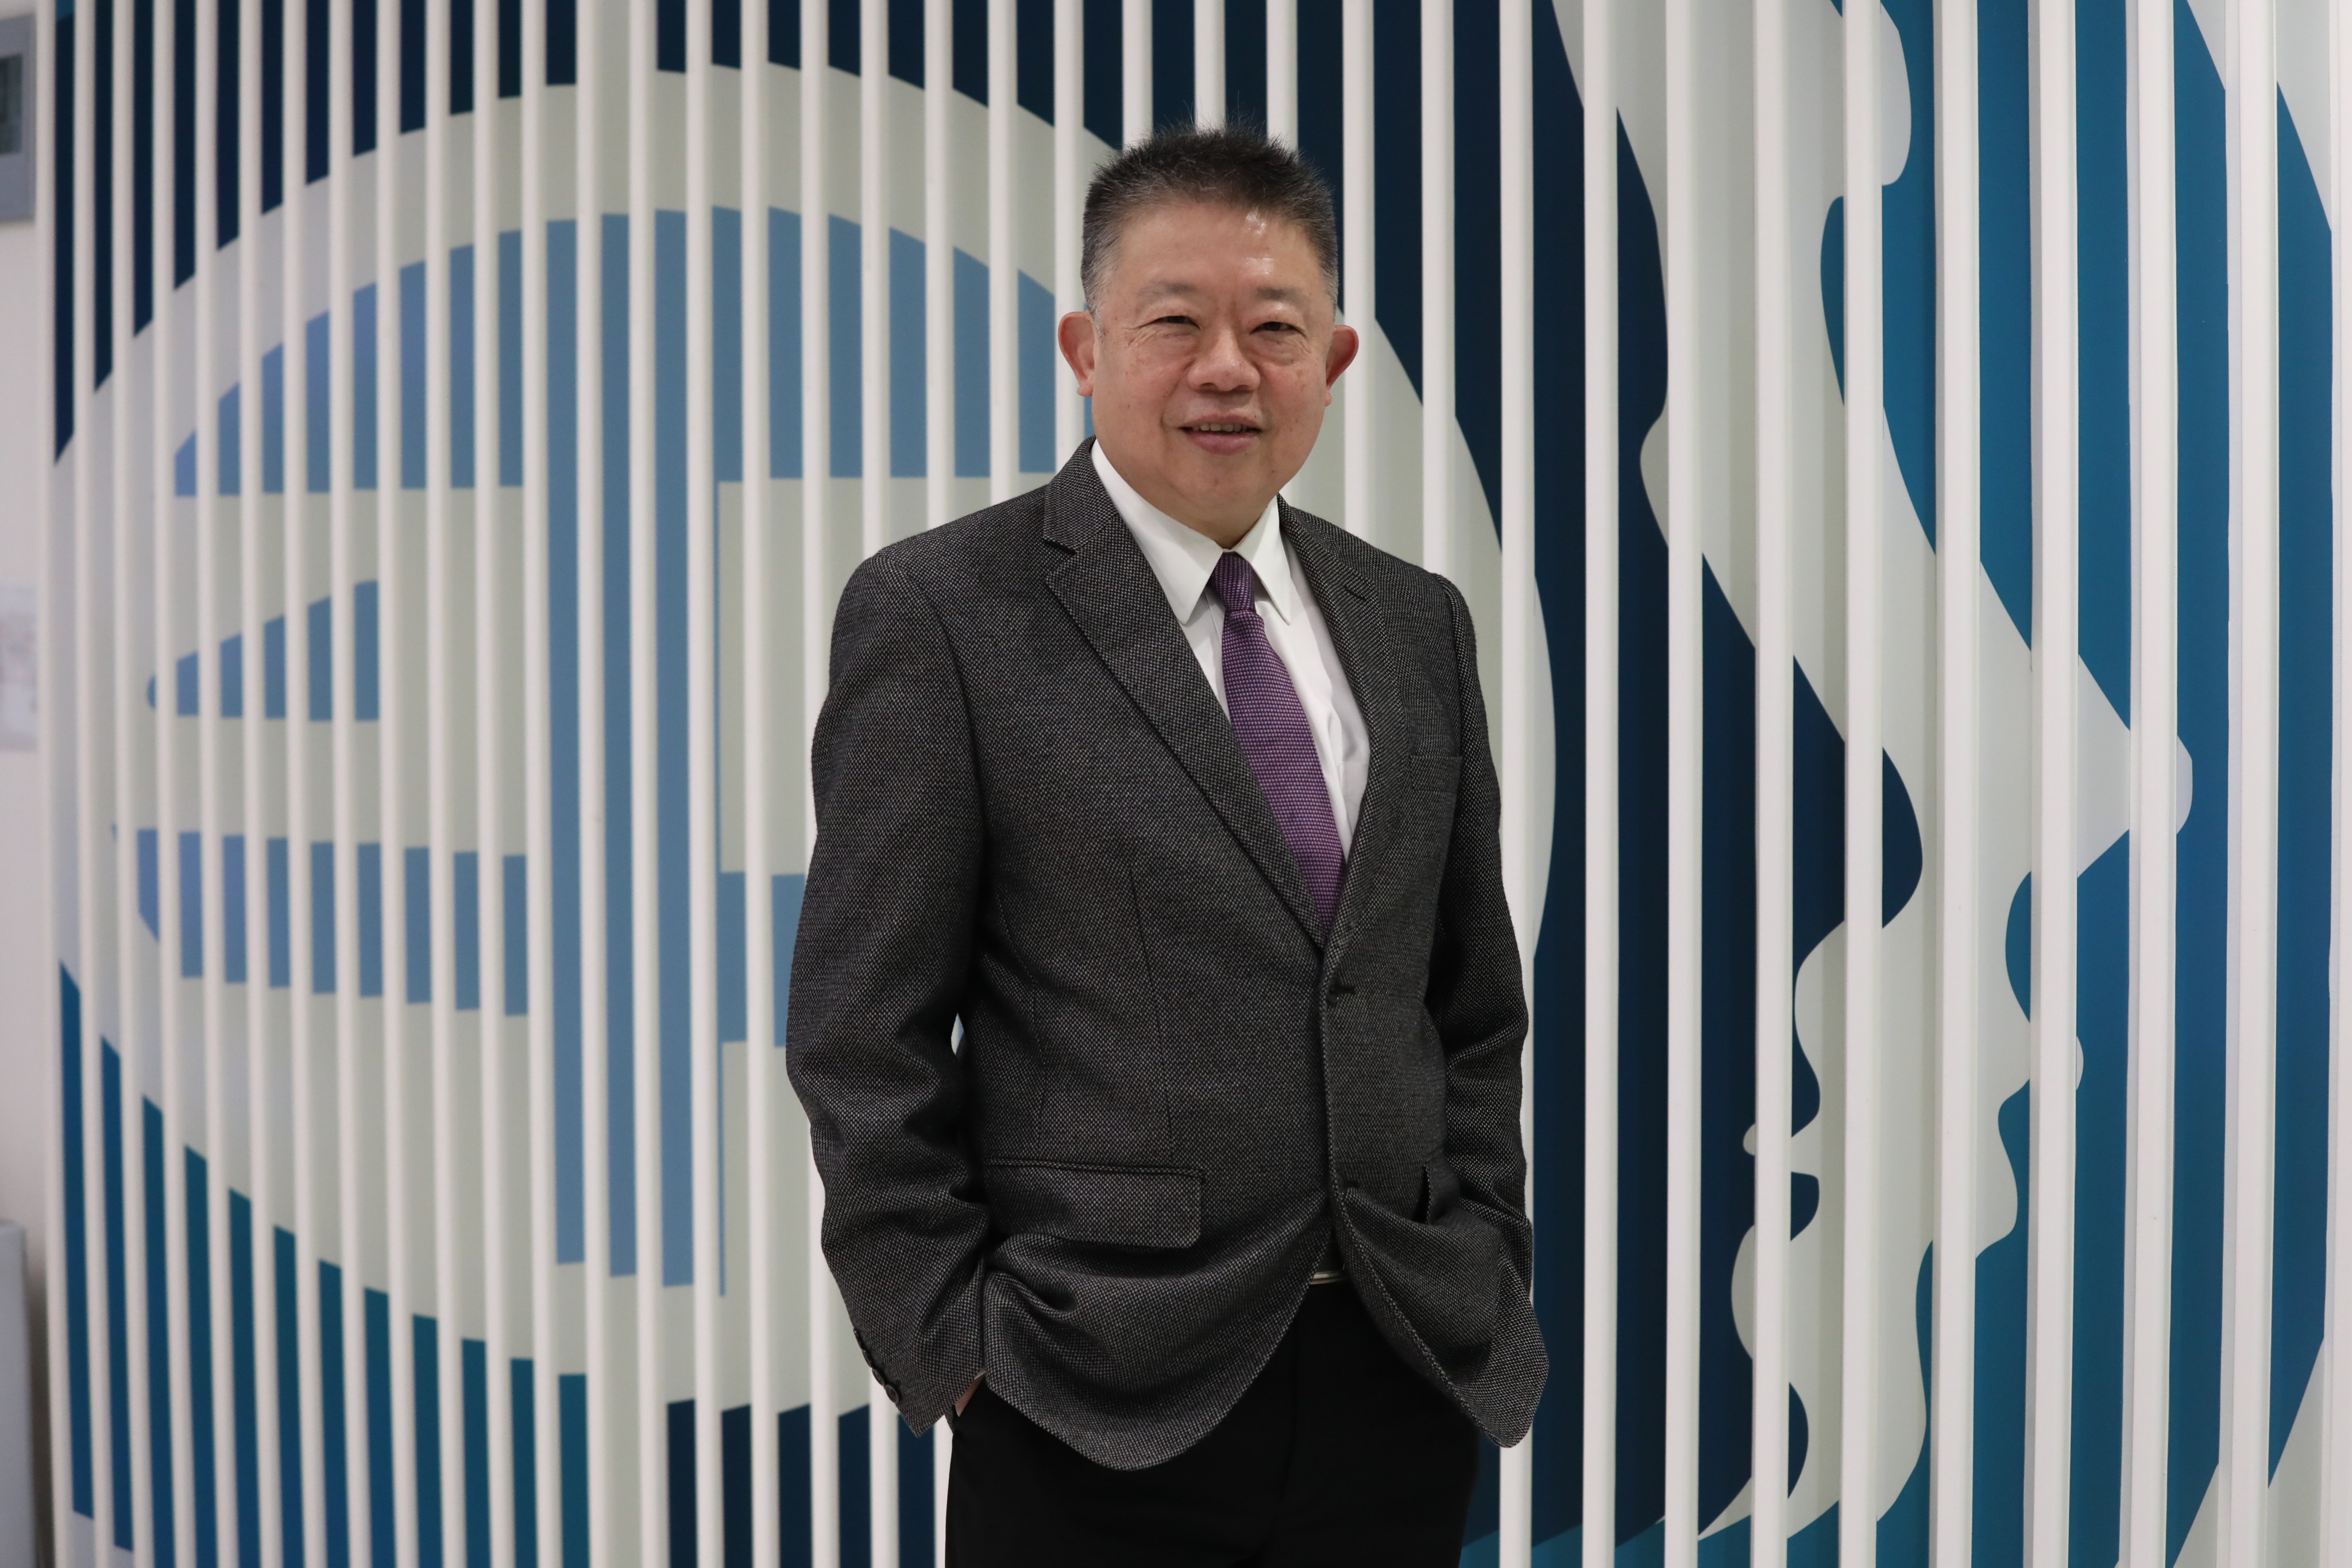 Chairman of the Equal Opportunities Commission Ricky Chu at his office in Wong Chuk Hang. Photo: Jonathan Wong